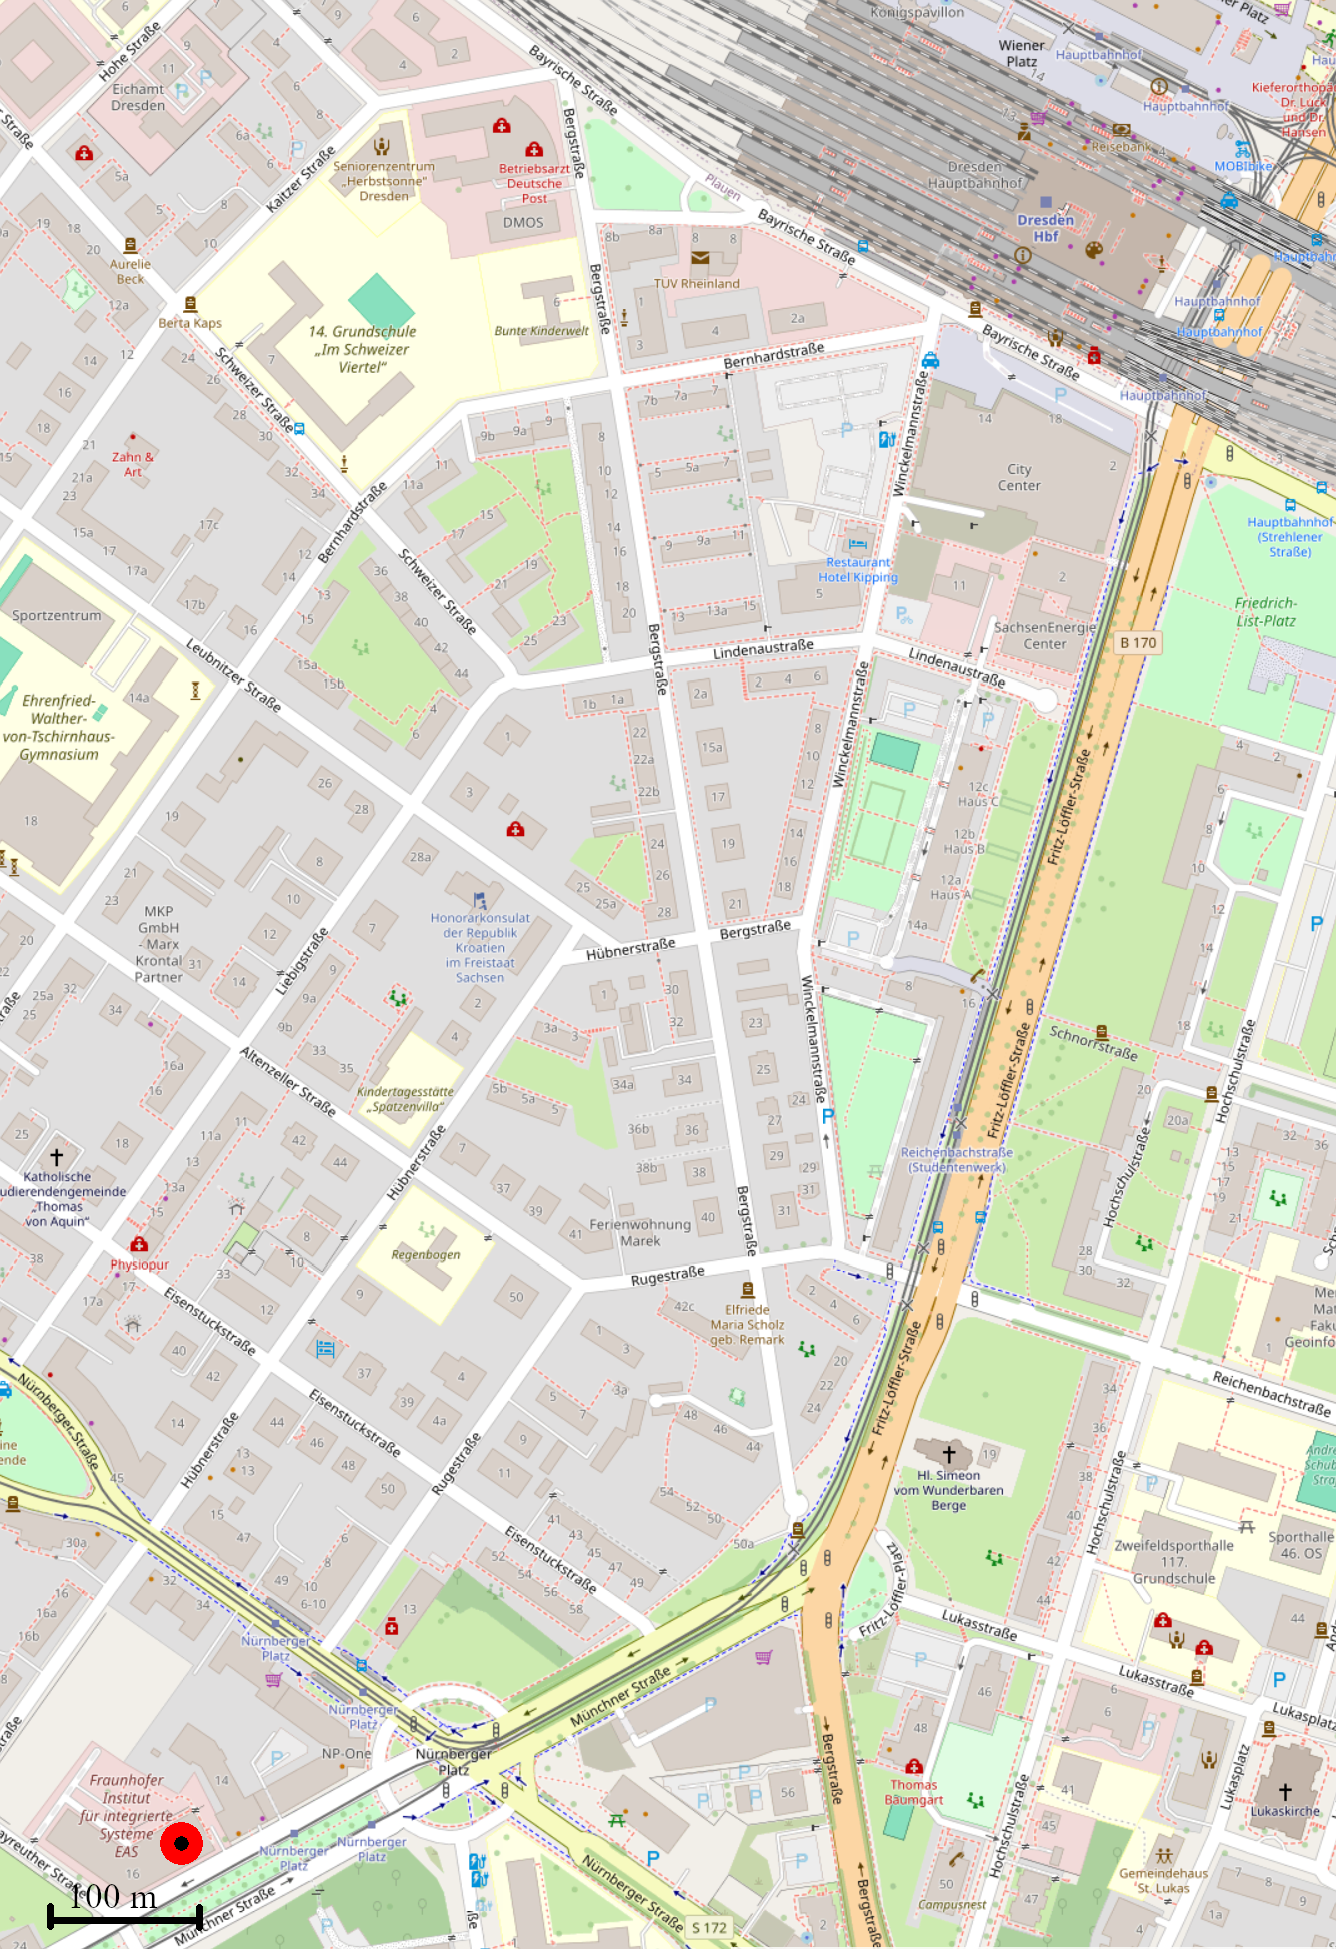 Map to Fraunhofer IIS/EAS from main train station (from openstreetmap)